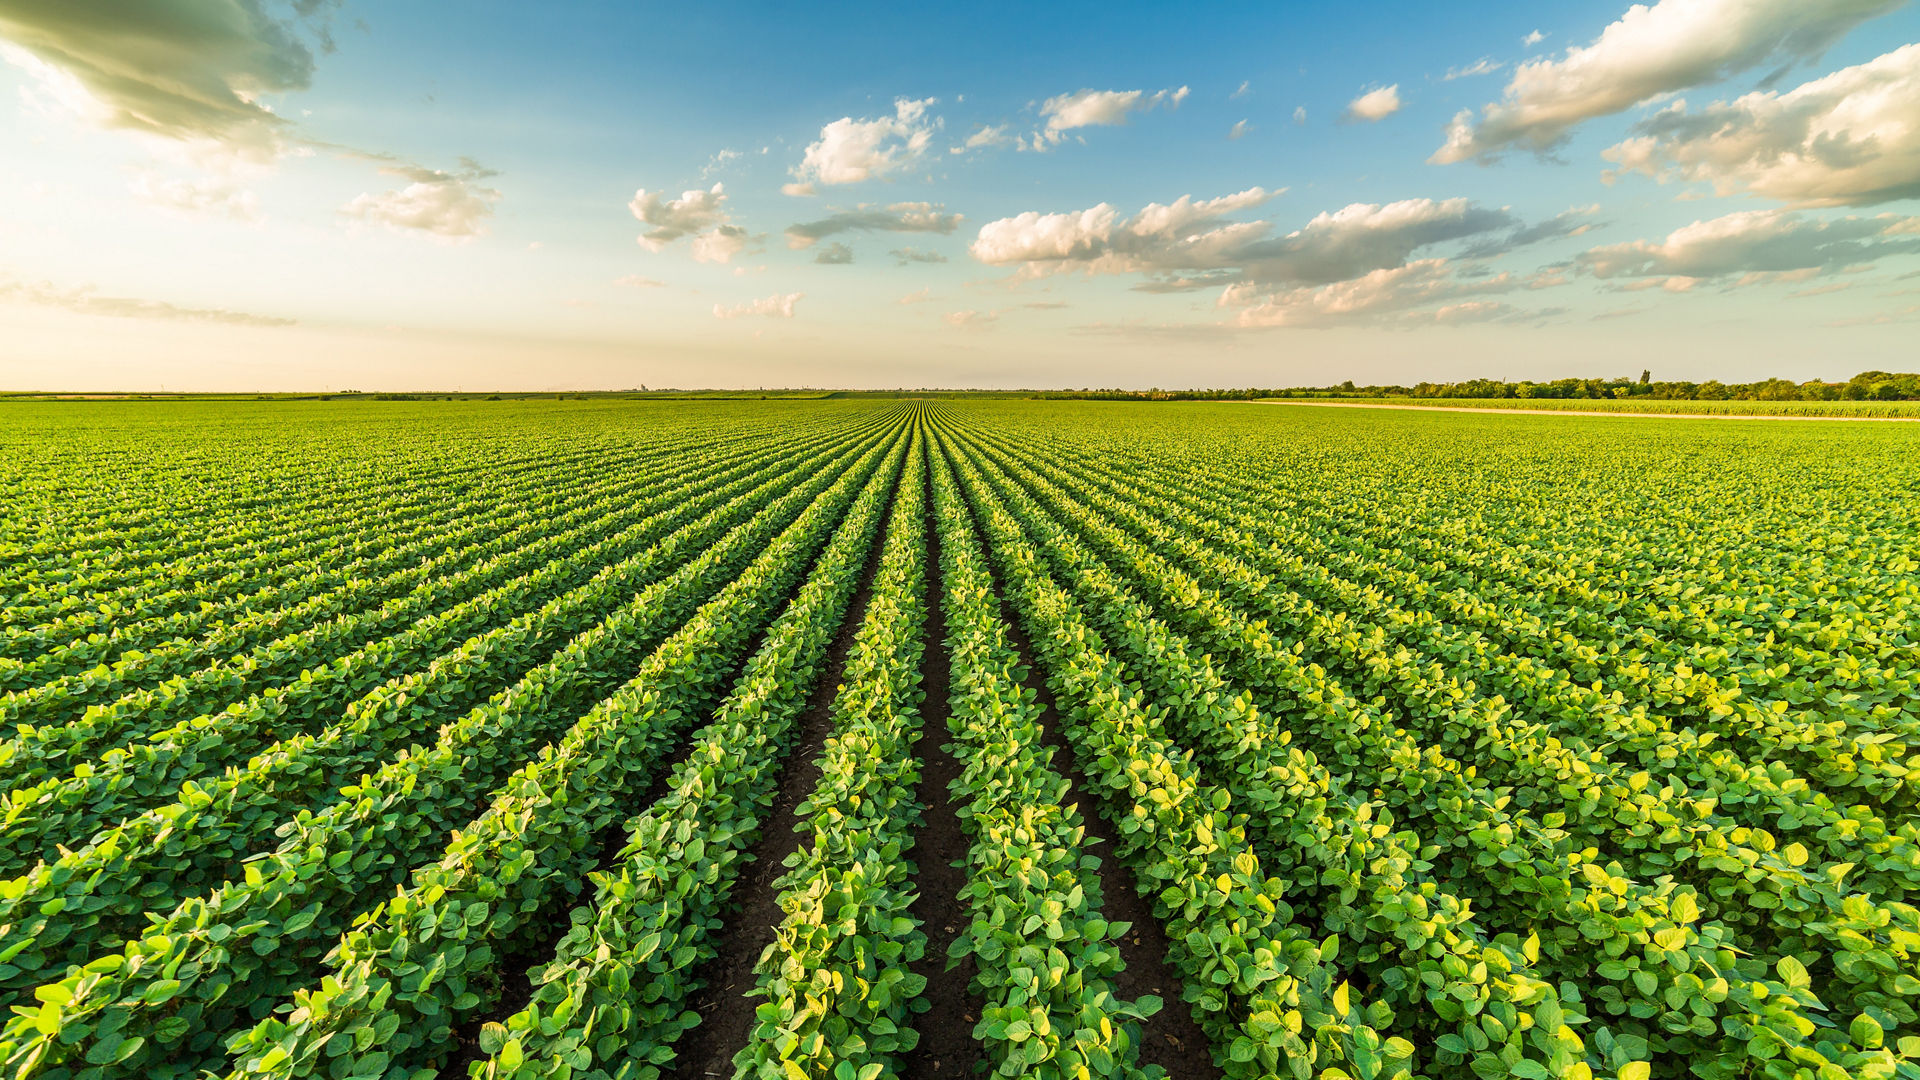 Green ripening soybean field, agricultural landscape; Shutterstock ID 1061717603; purchase_order: EVS; job: EVS; client: EVS; other: EVS